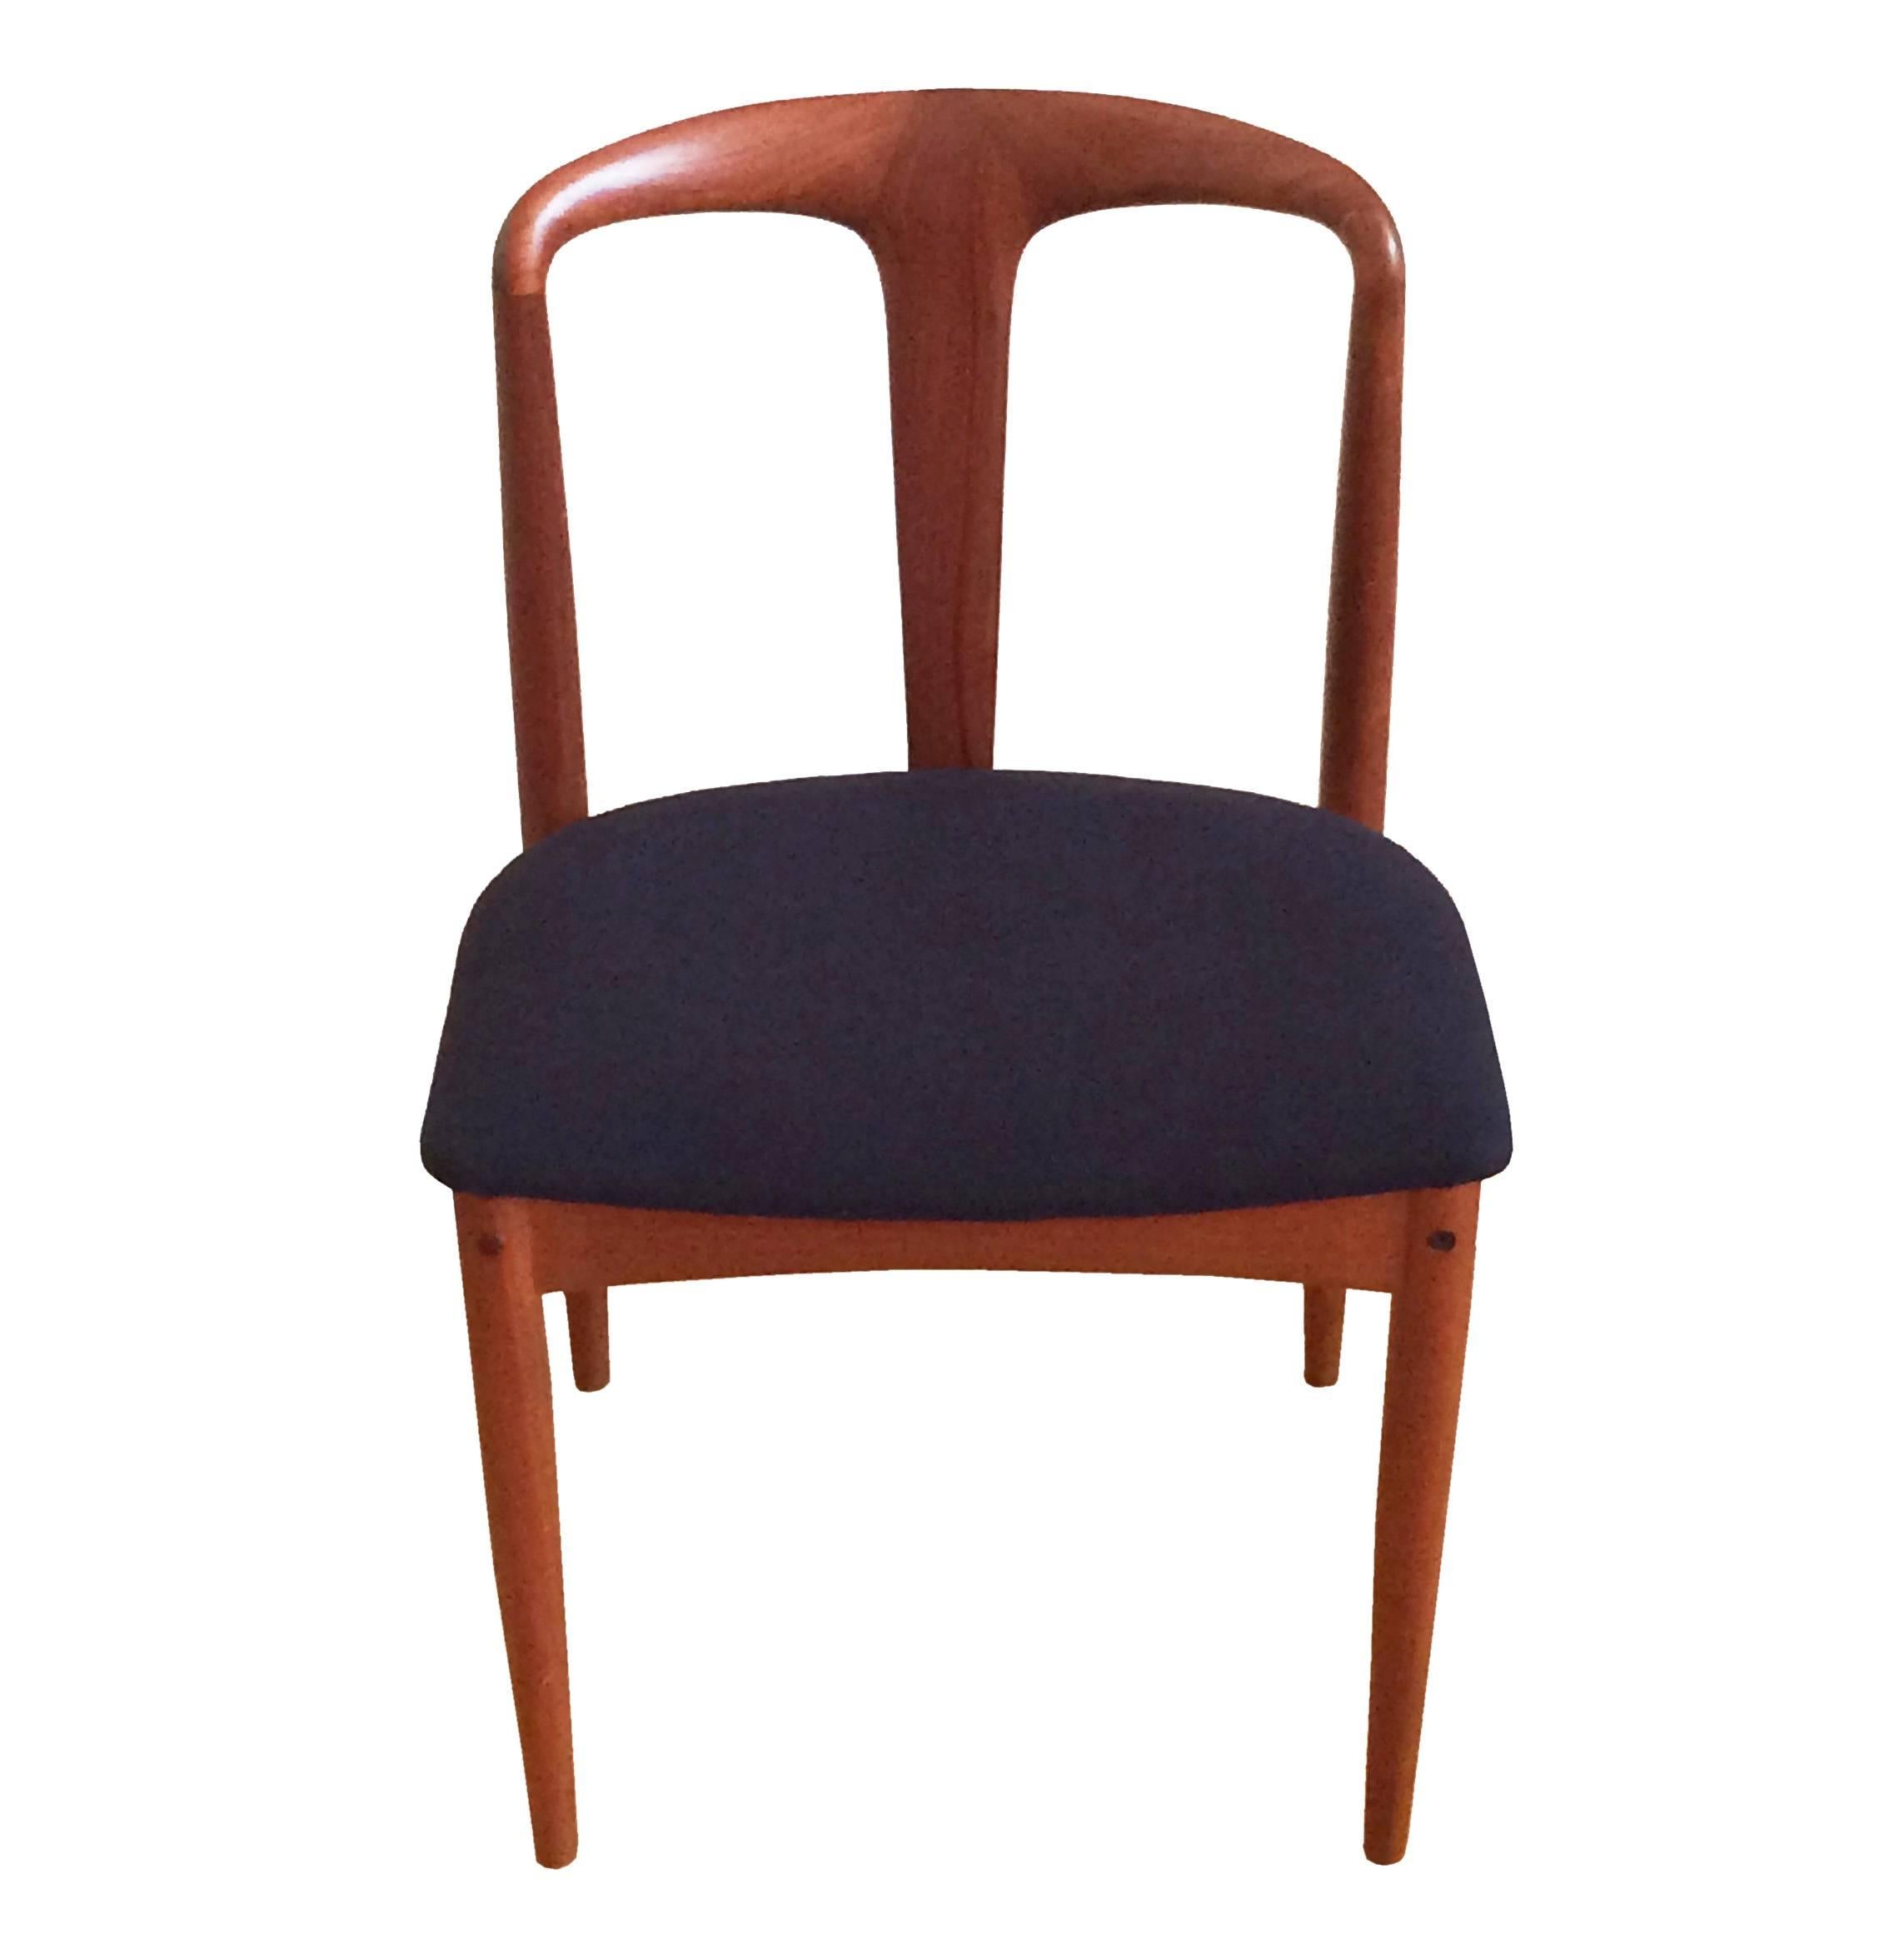 This Danish Mid-Century 'Juliane' chair was designed by Johannes Andersen for Uldum during the 1960s. The design features an organic style, seat is re-upholstered in navy cashmere. The original brown fabric remains under this easily removable fabric